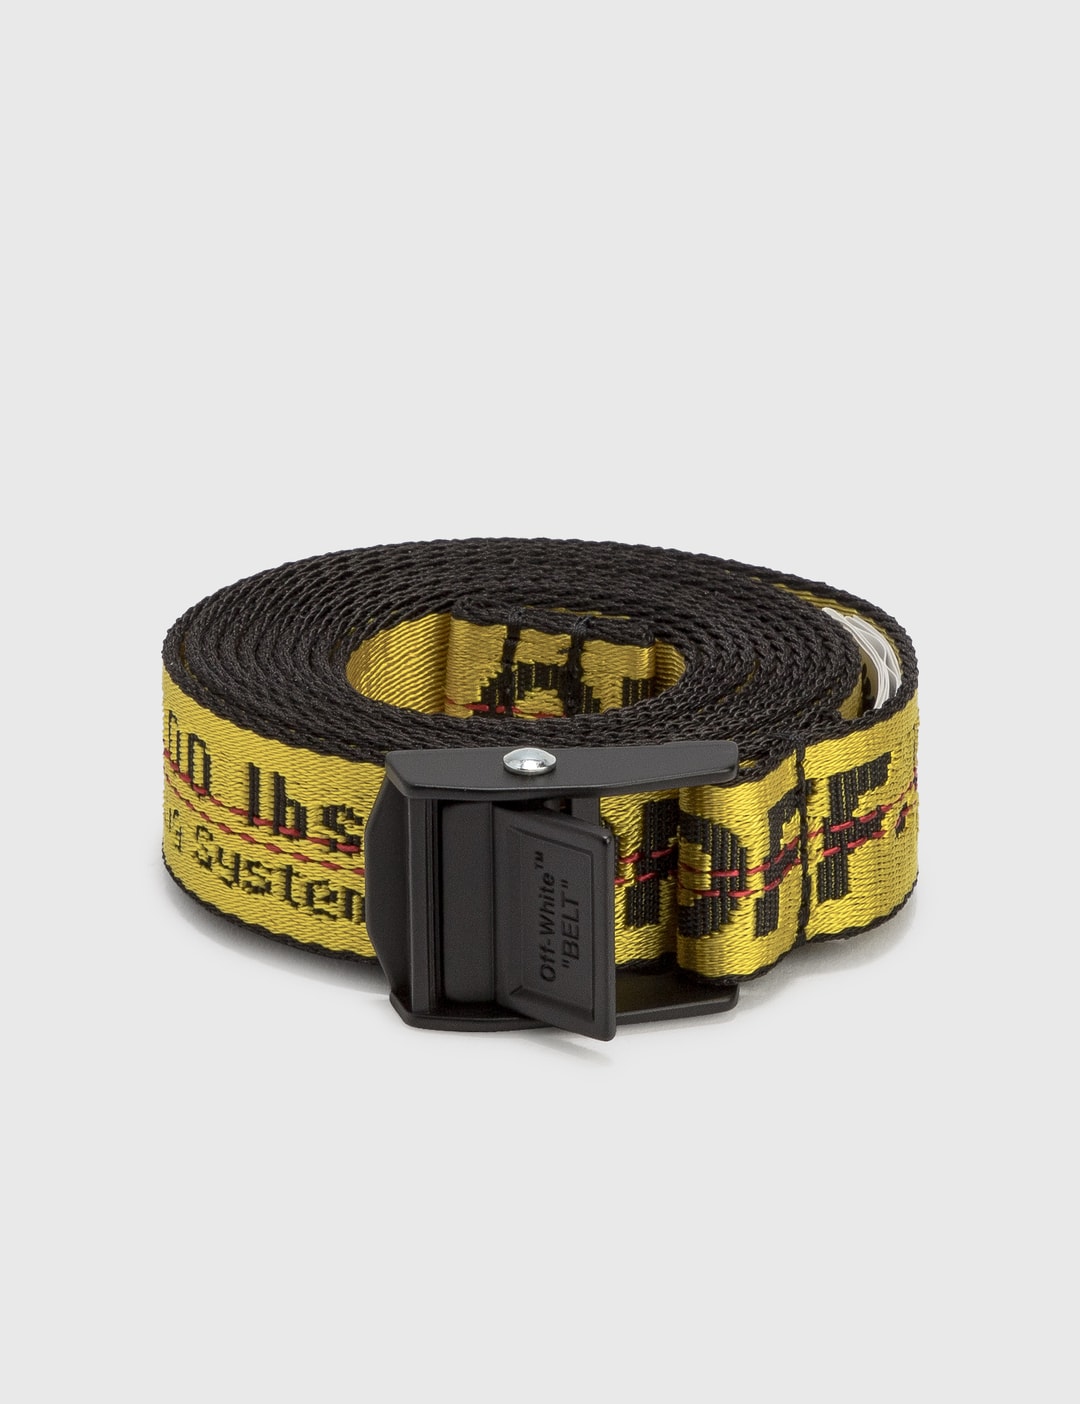 Off-White - Mini Industrial Belt | HBX - Globally Curated Fashion by Hypebeast